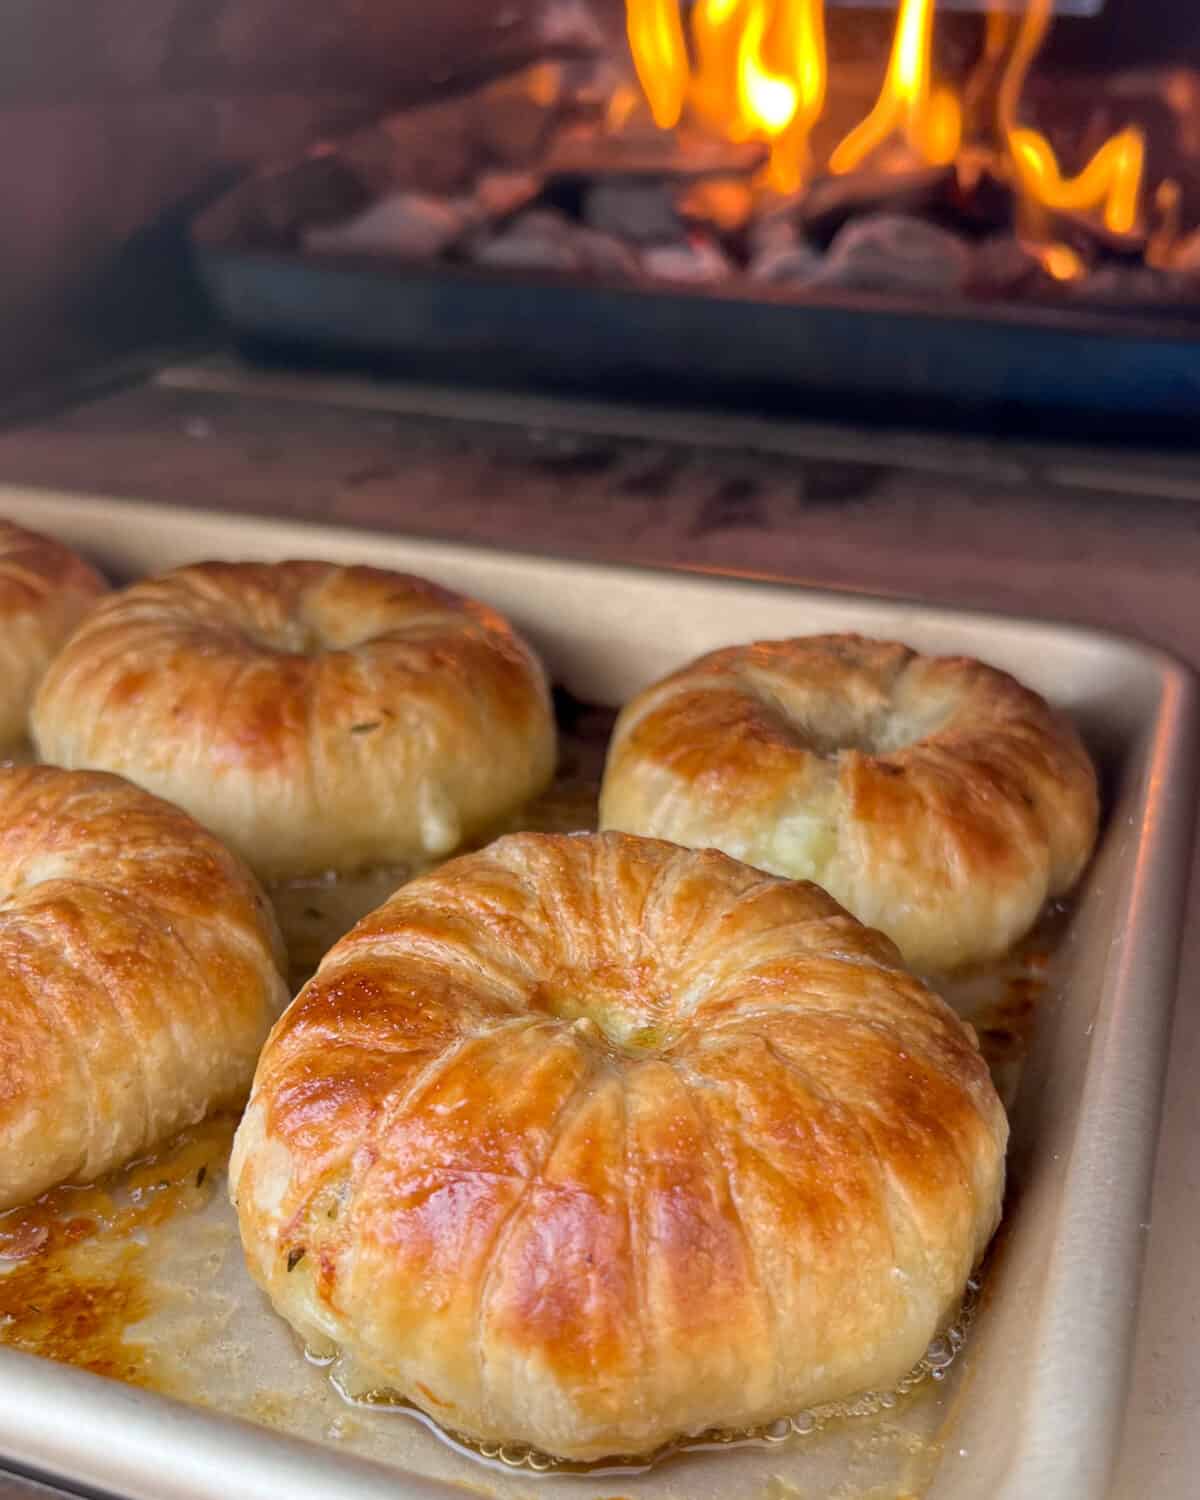 Savoury Apple-Brie Hand Pies in an Ooni with flames in the background.